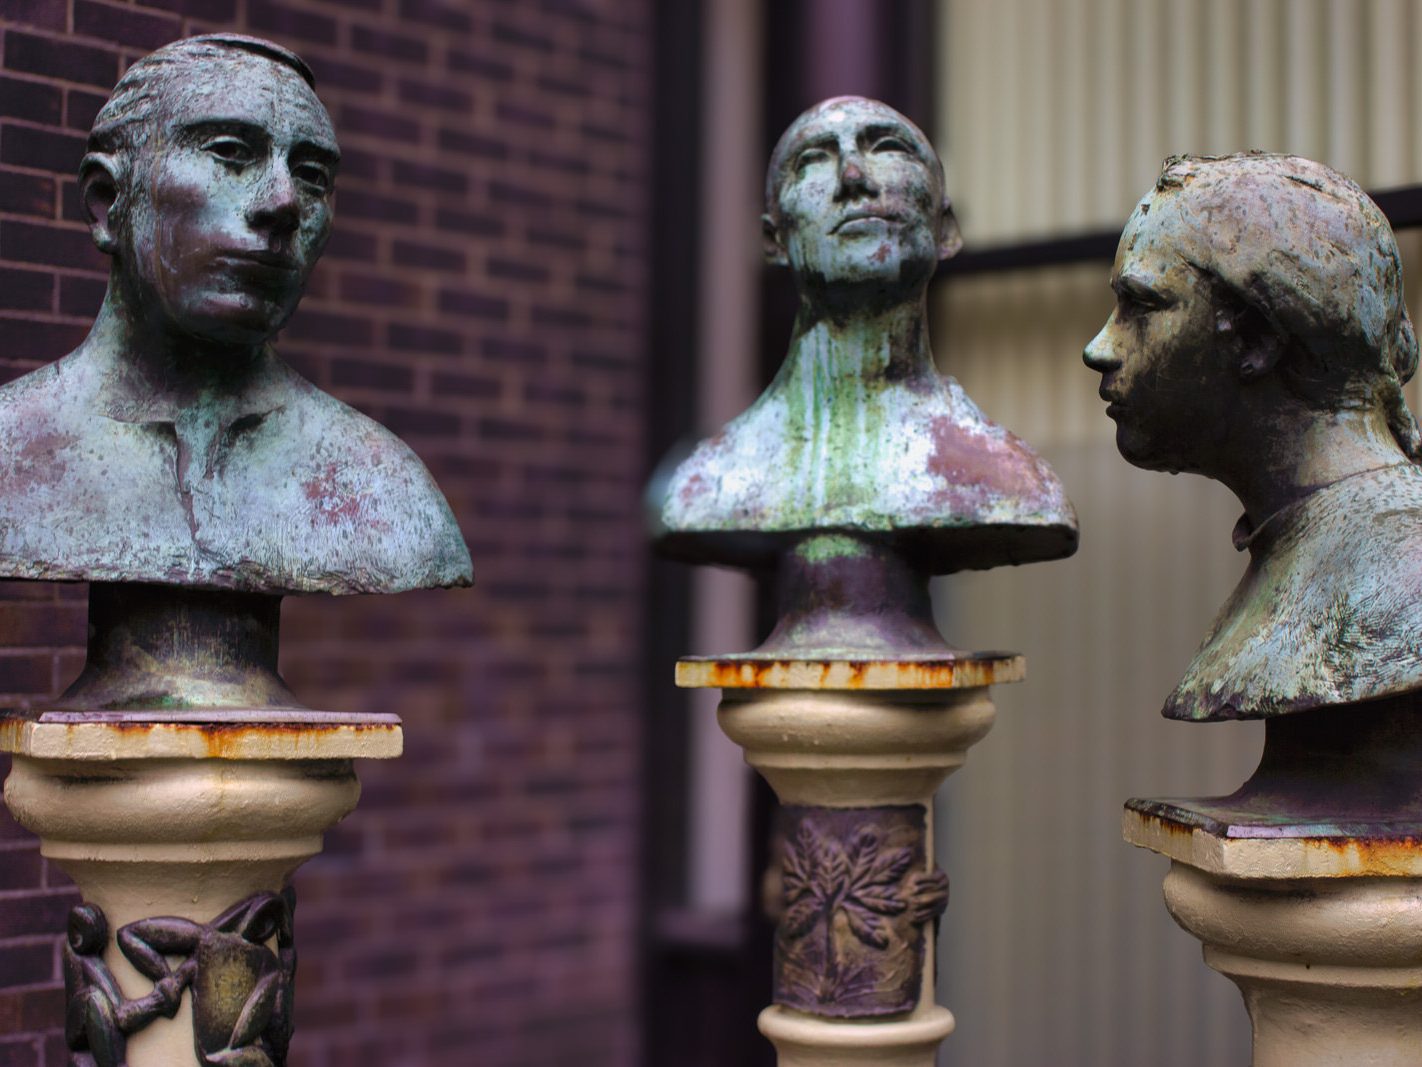 THE TALKING HEADS ON ABBEY STREET HAVE DISAPPEARED [MULTI PIECE SCULPTURE BY CAROLYN MULHOLLAND]-227454-1